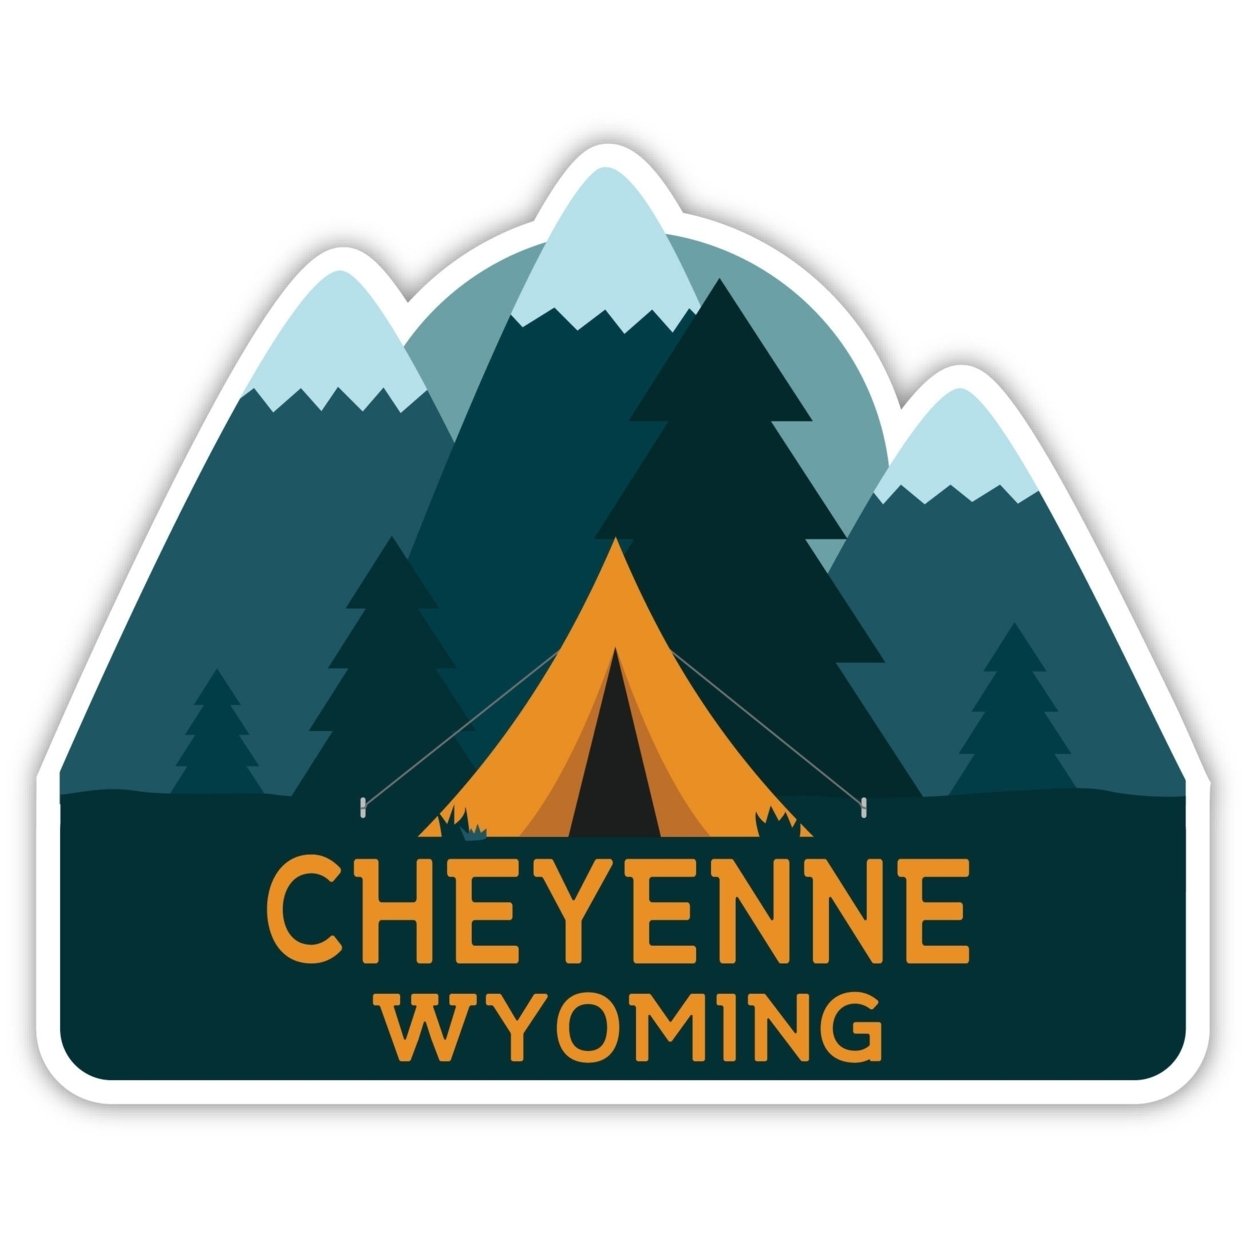 Cheyenne Wyoming Souvenir Decorative Stickers (Choose Theme And Size) - 4-Pack, 4-Inch, Tent